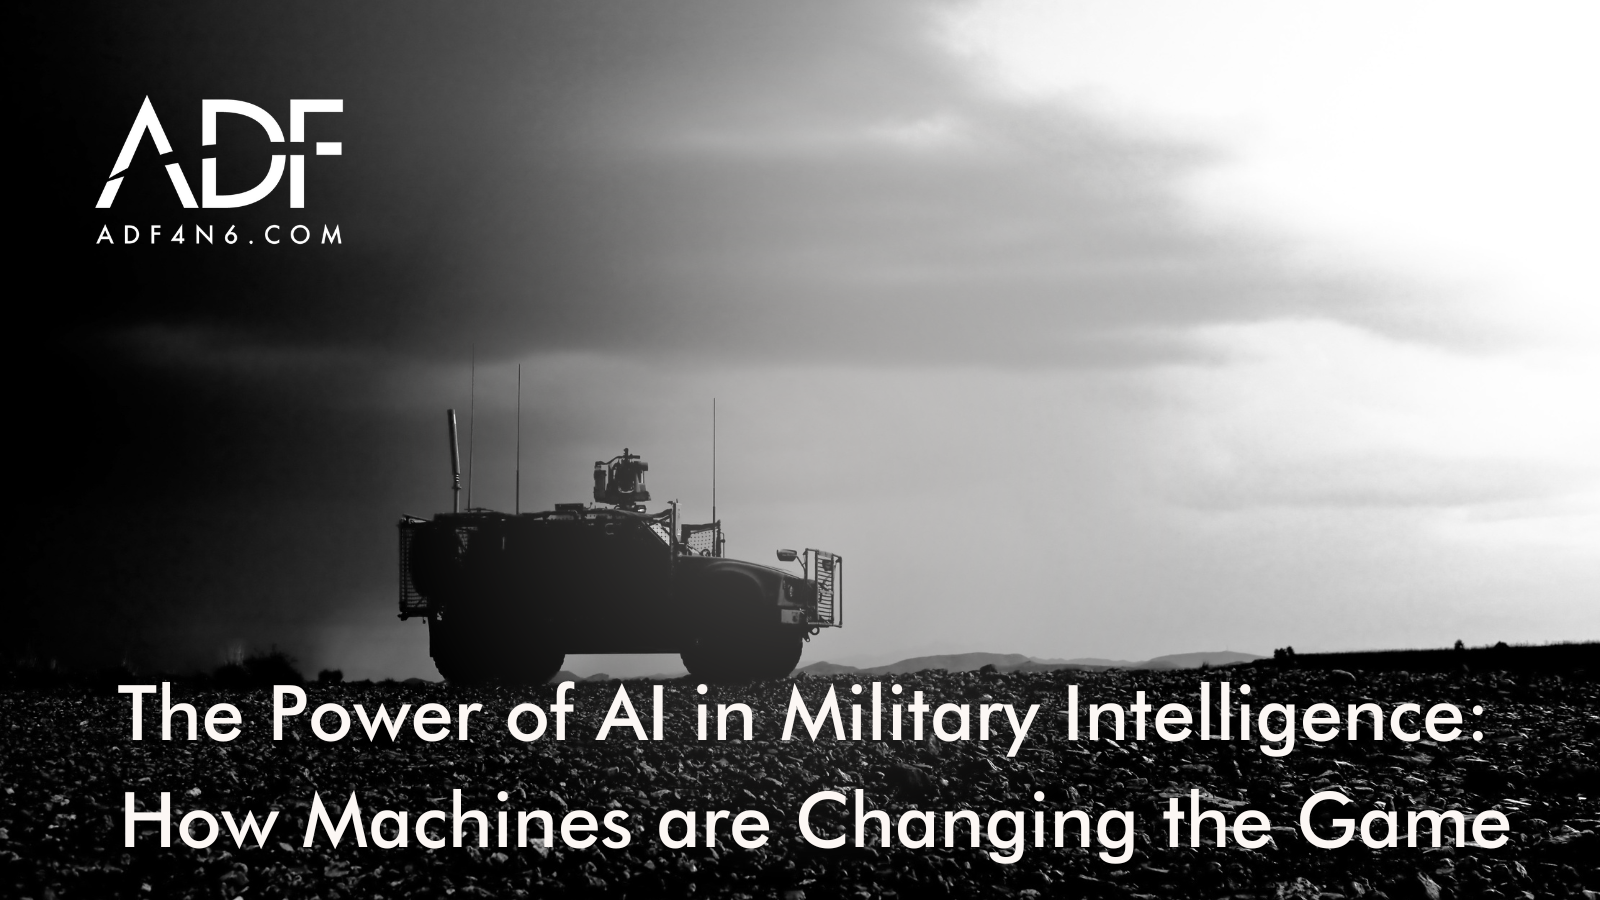 The Power of AI in Military Intelligence: How Machines are Changing the Game